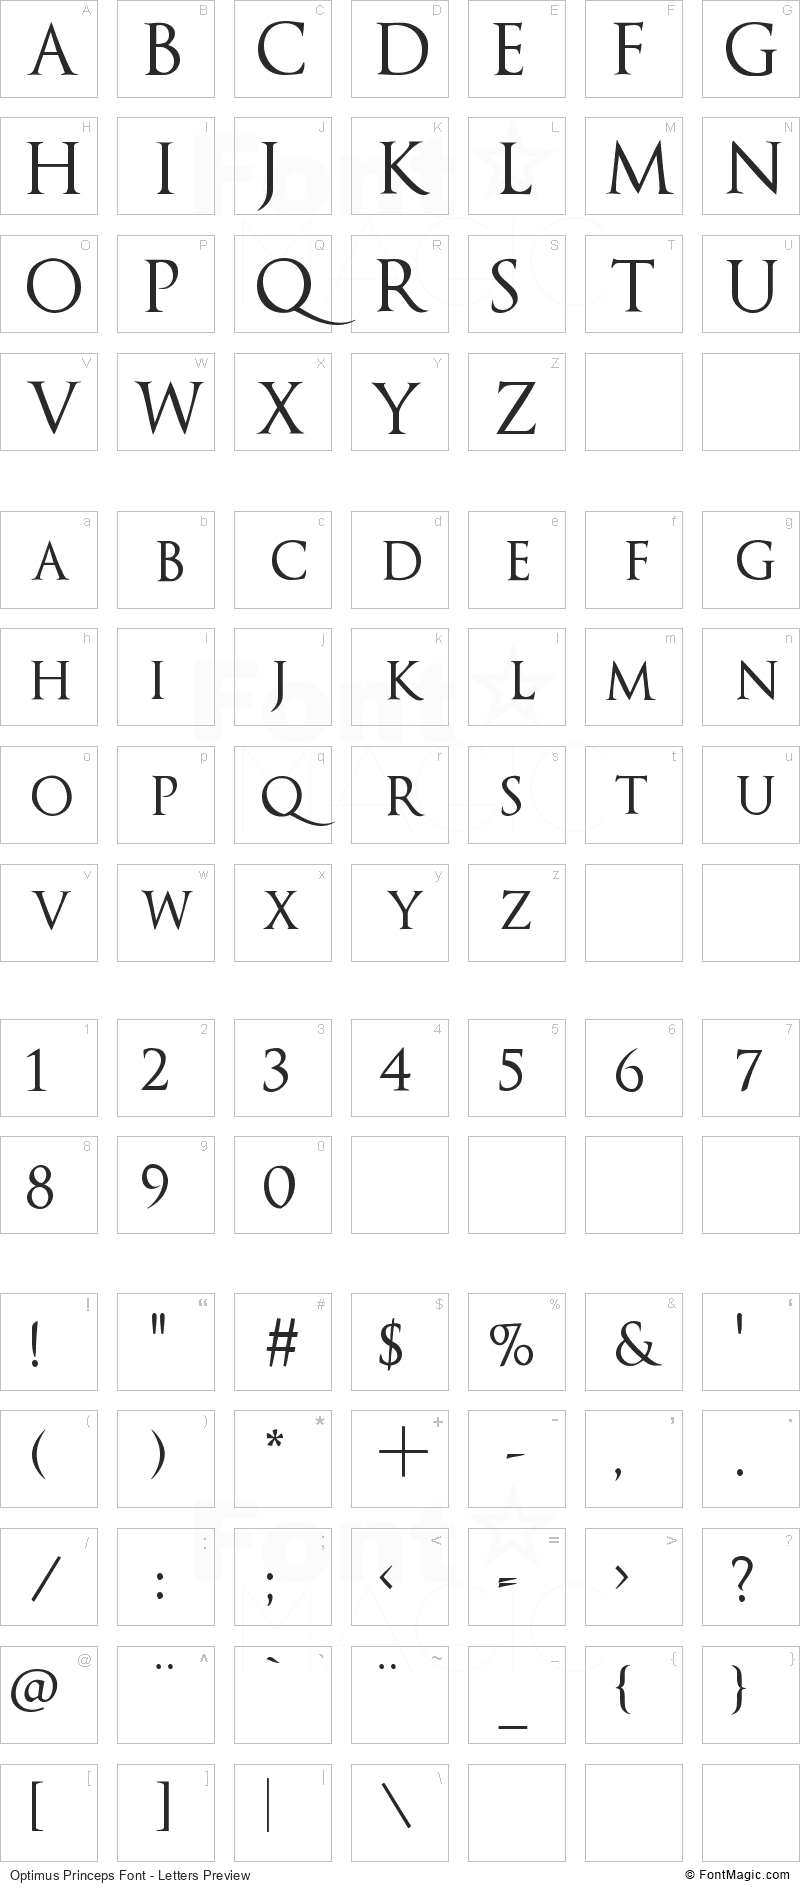 Optimus Princeps Font - All Latters Preview Chart